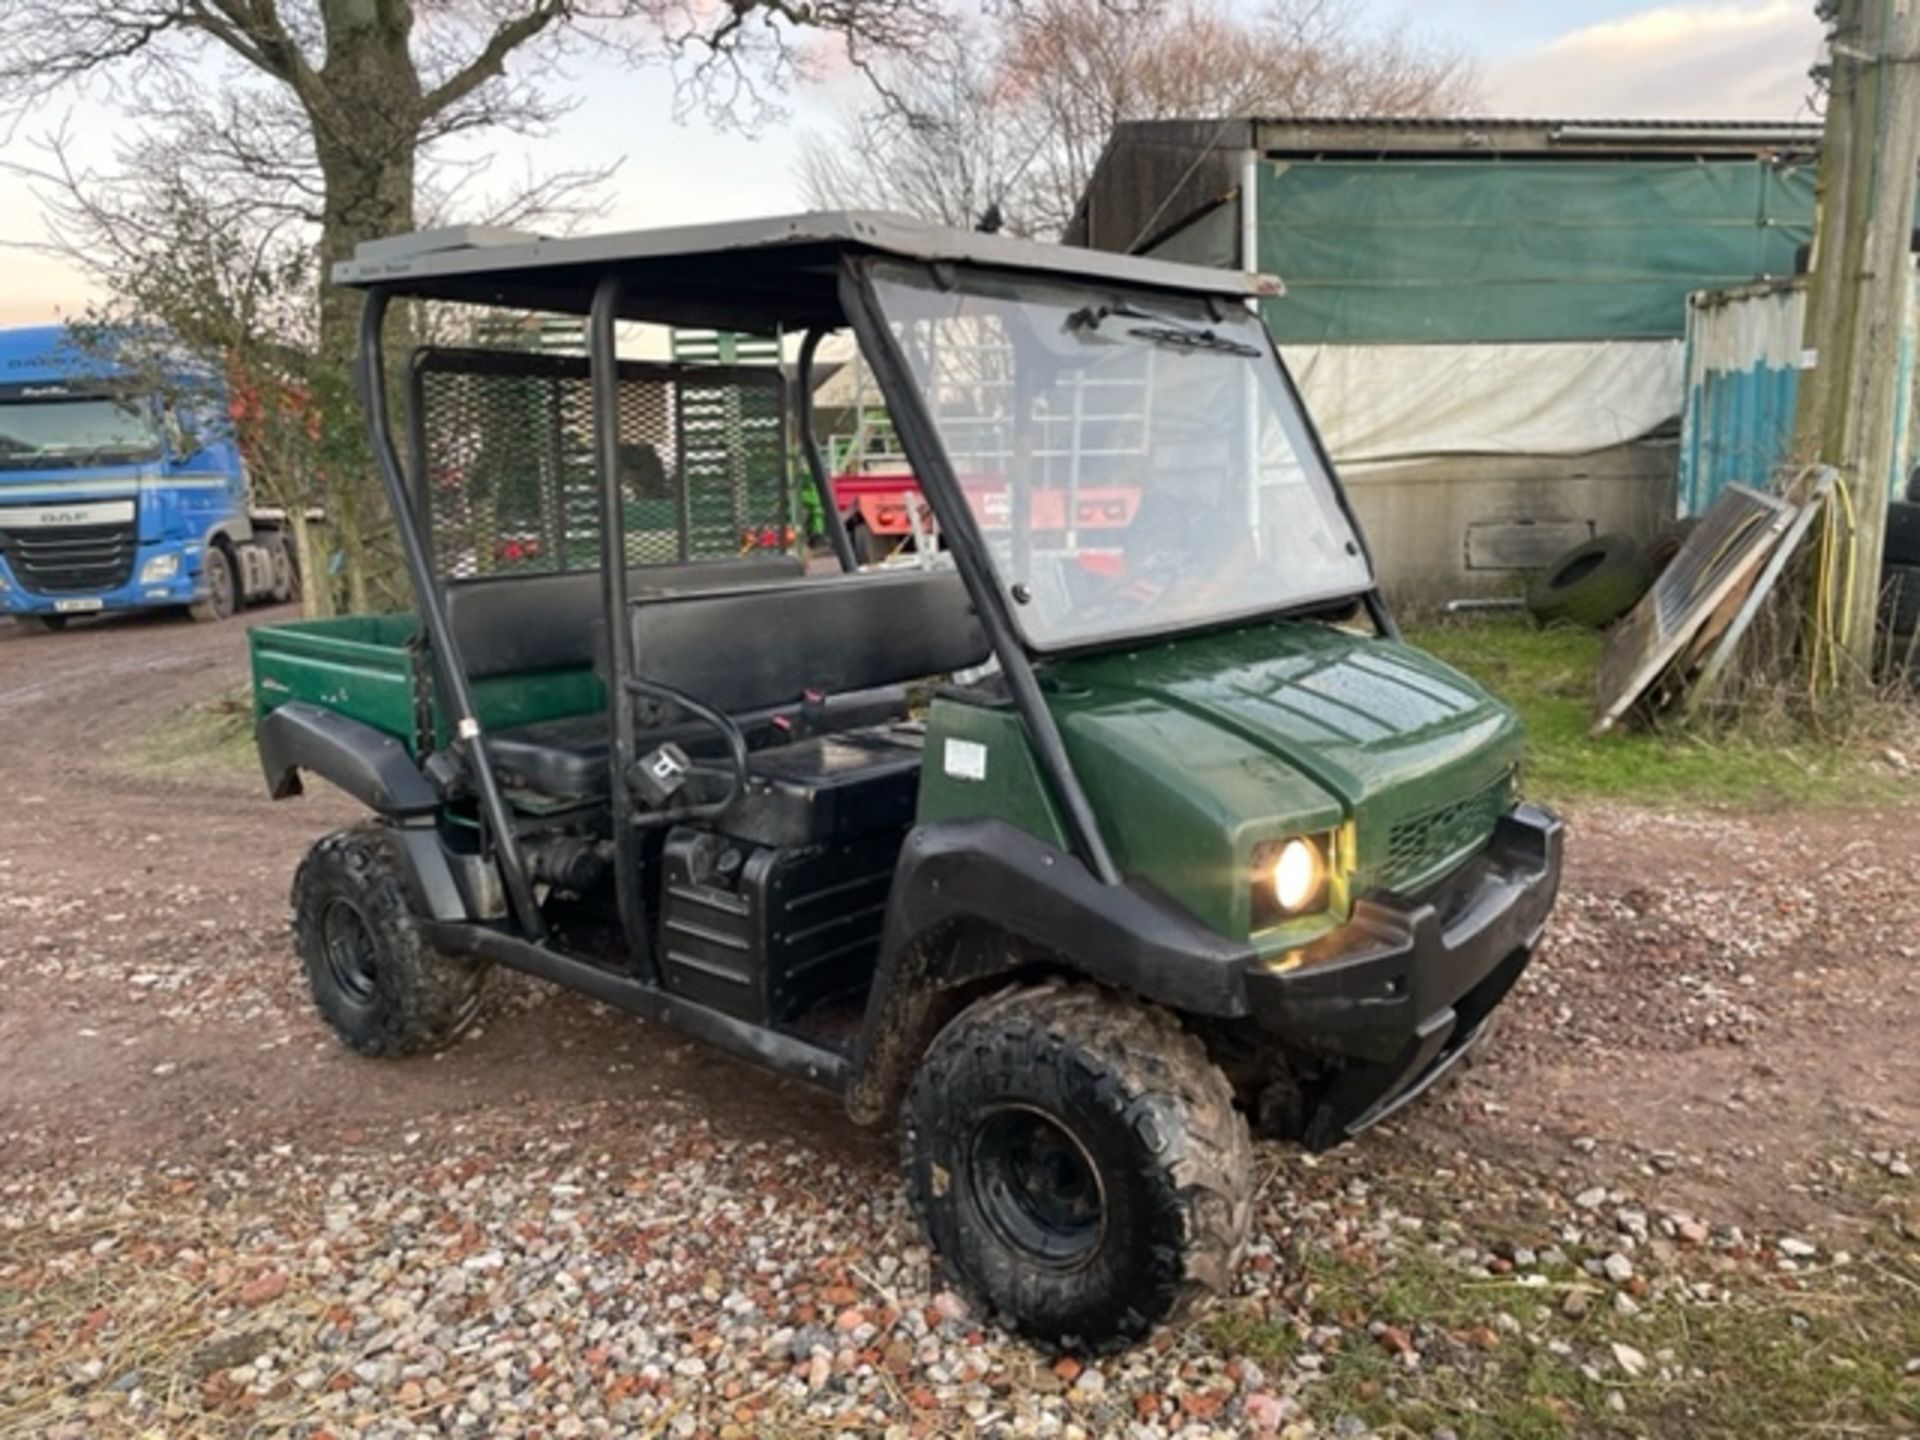 KAWASAKI MULE 4010, REAR SEATS FOLD AND TURSN INTO 2 SEATER WITH EXTENDED BED, 1983 HOURS *PLUS VAT*